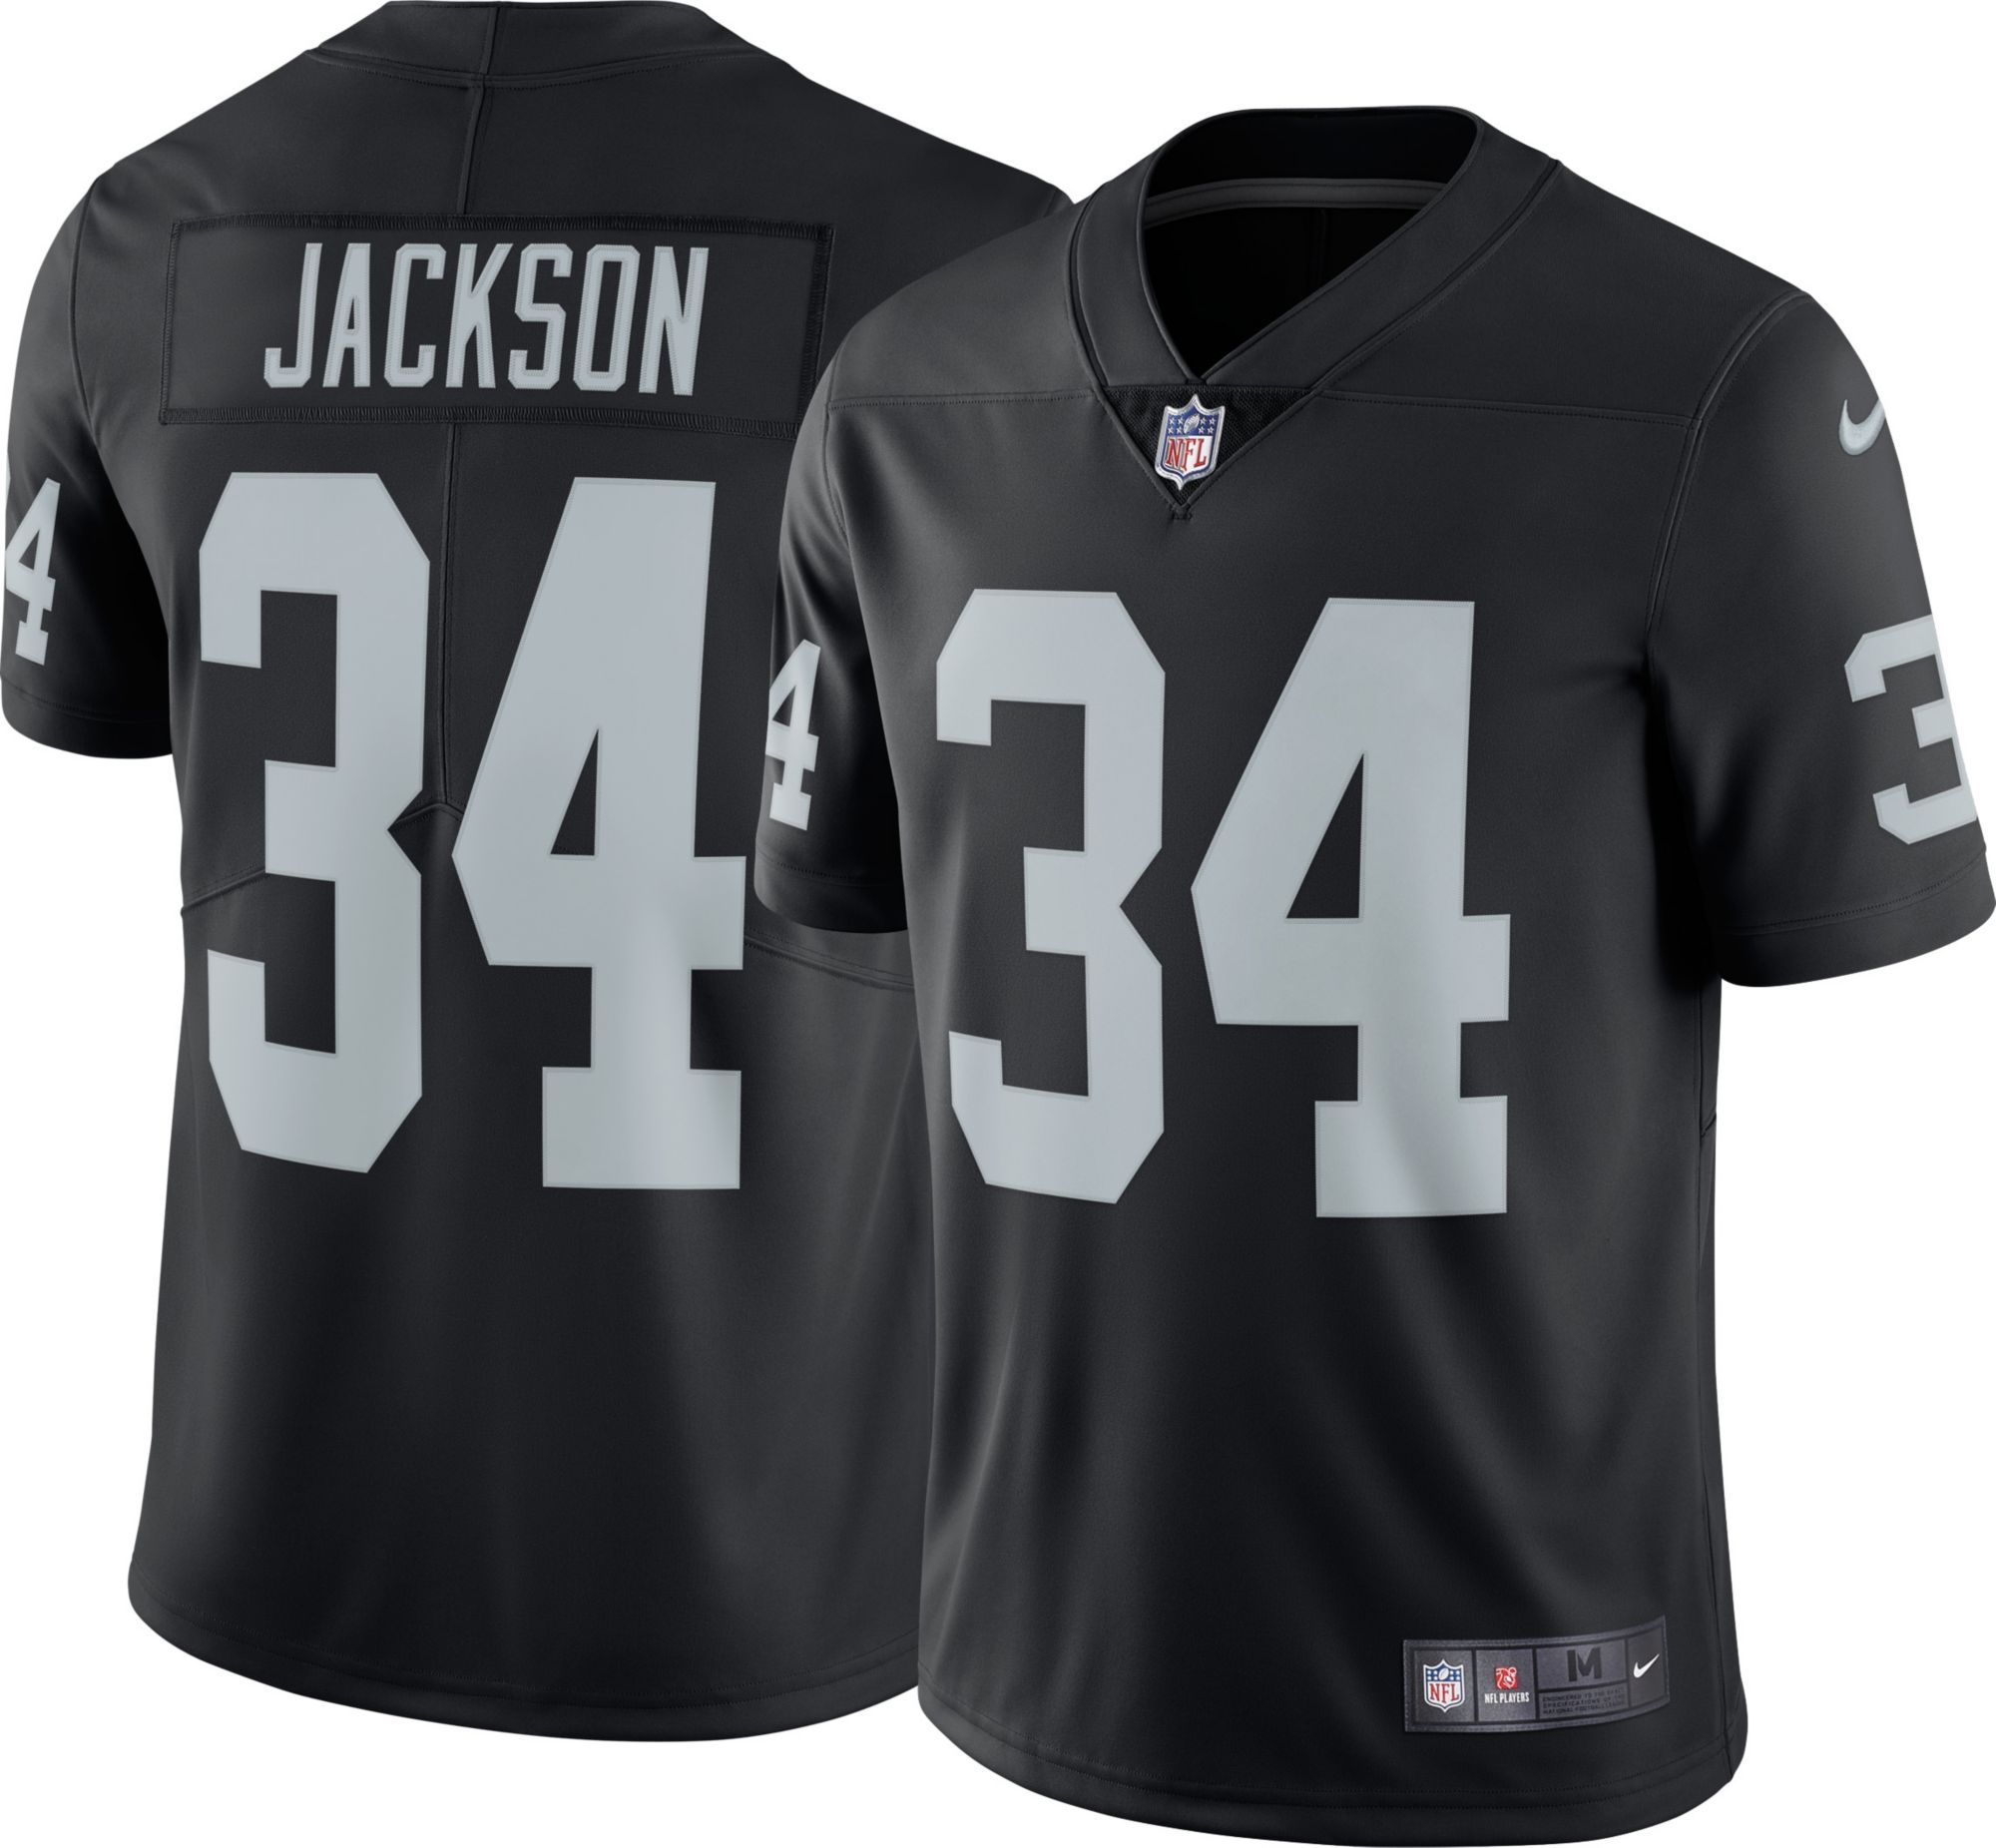 raiders jersey number 34